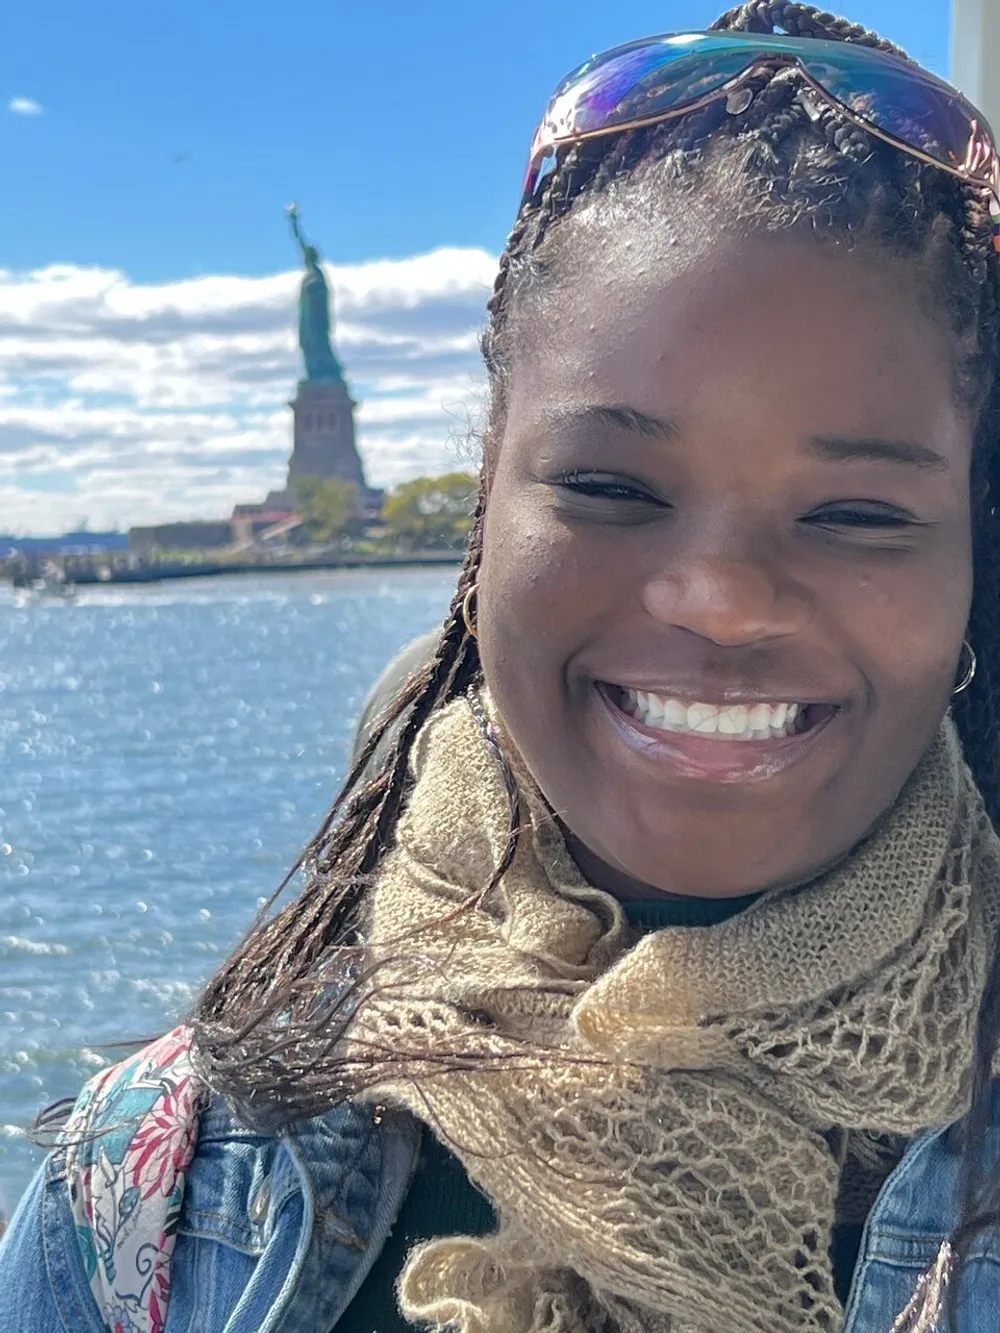 A smiling person poses for a photo with the Statue of Liberty in the background